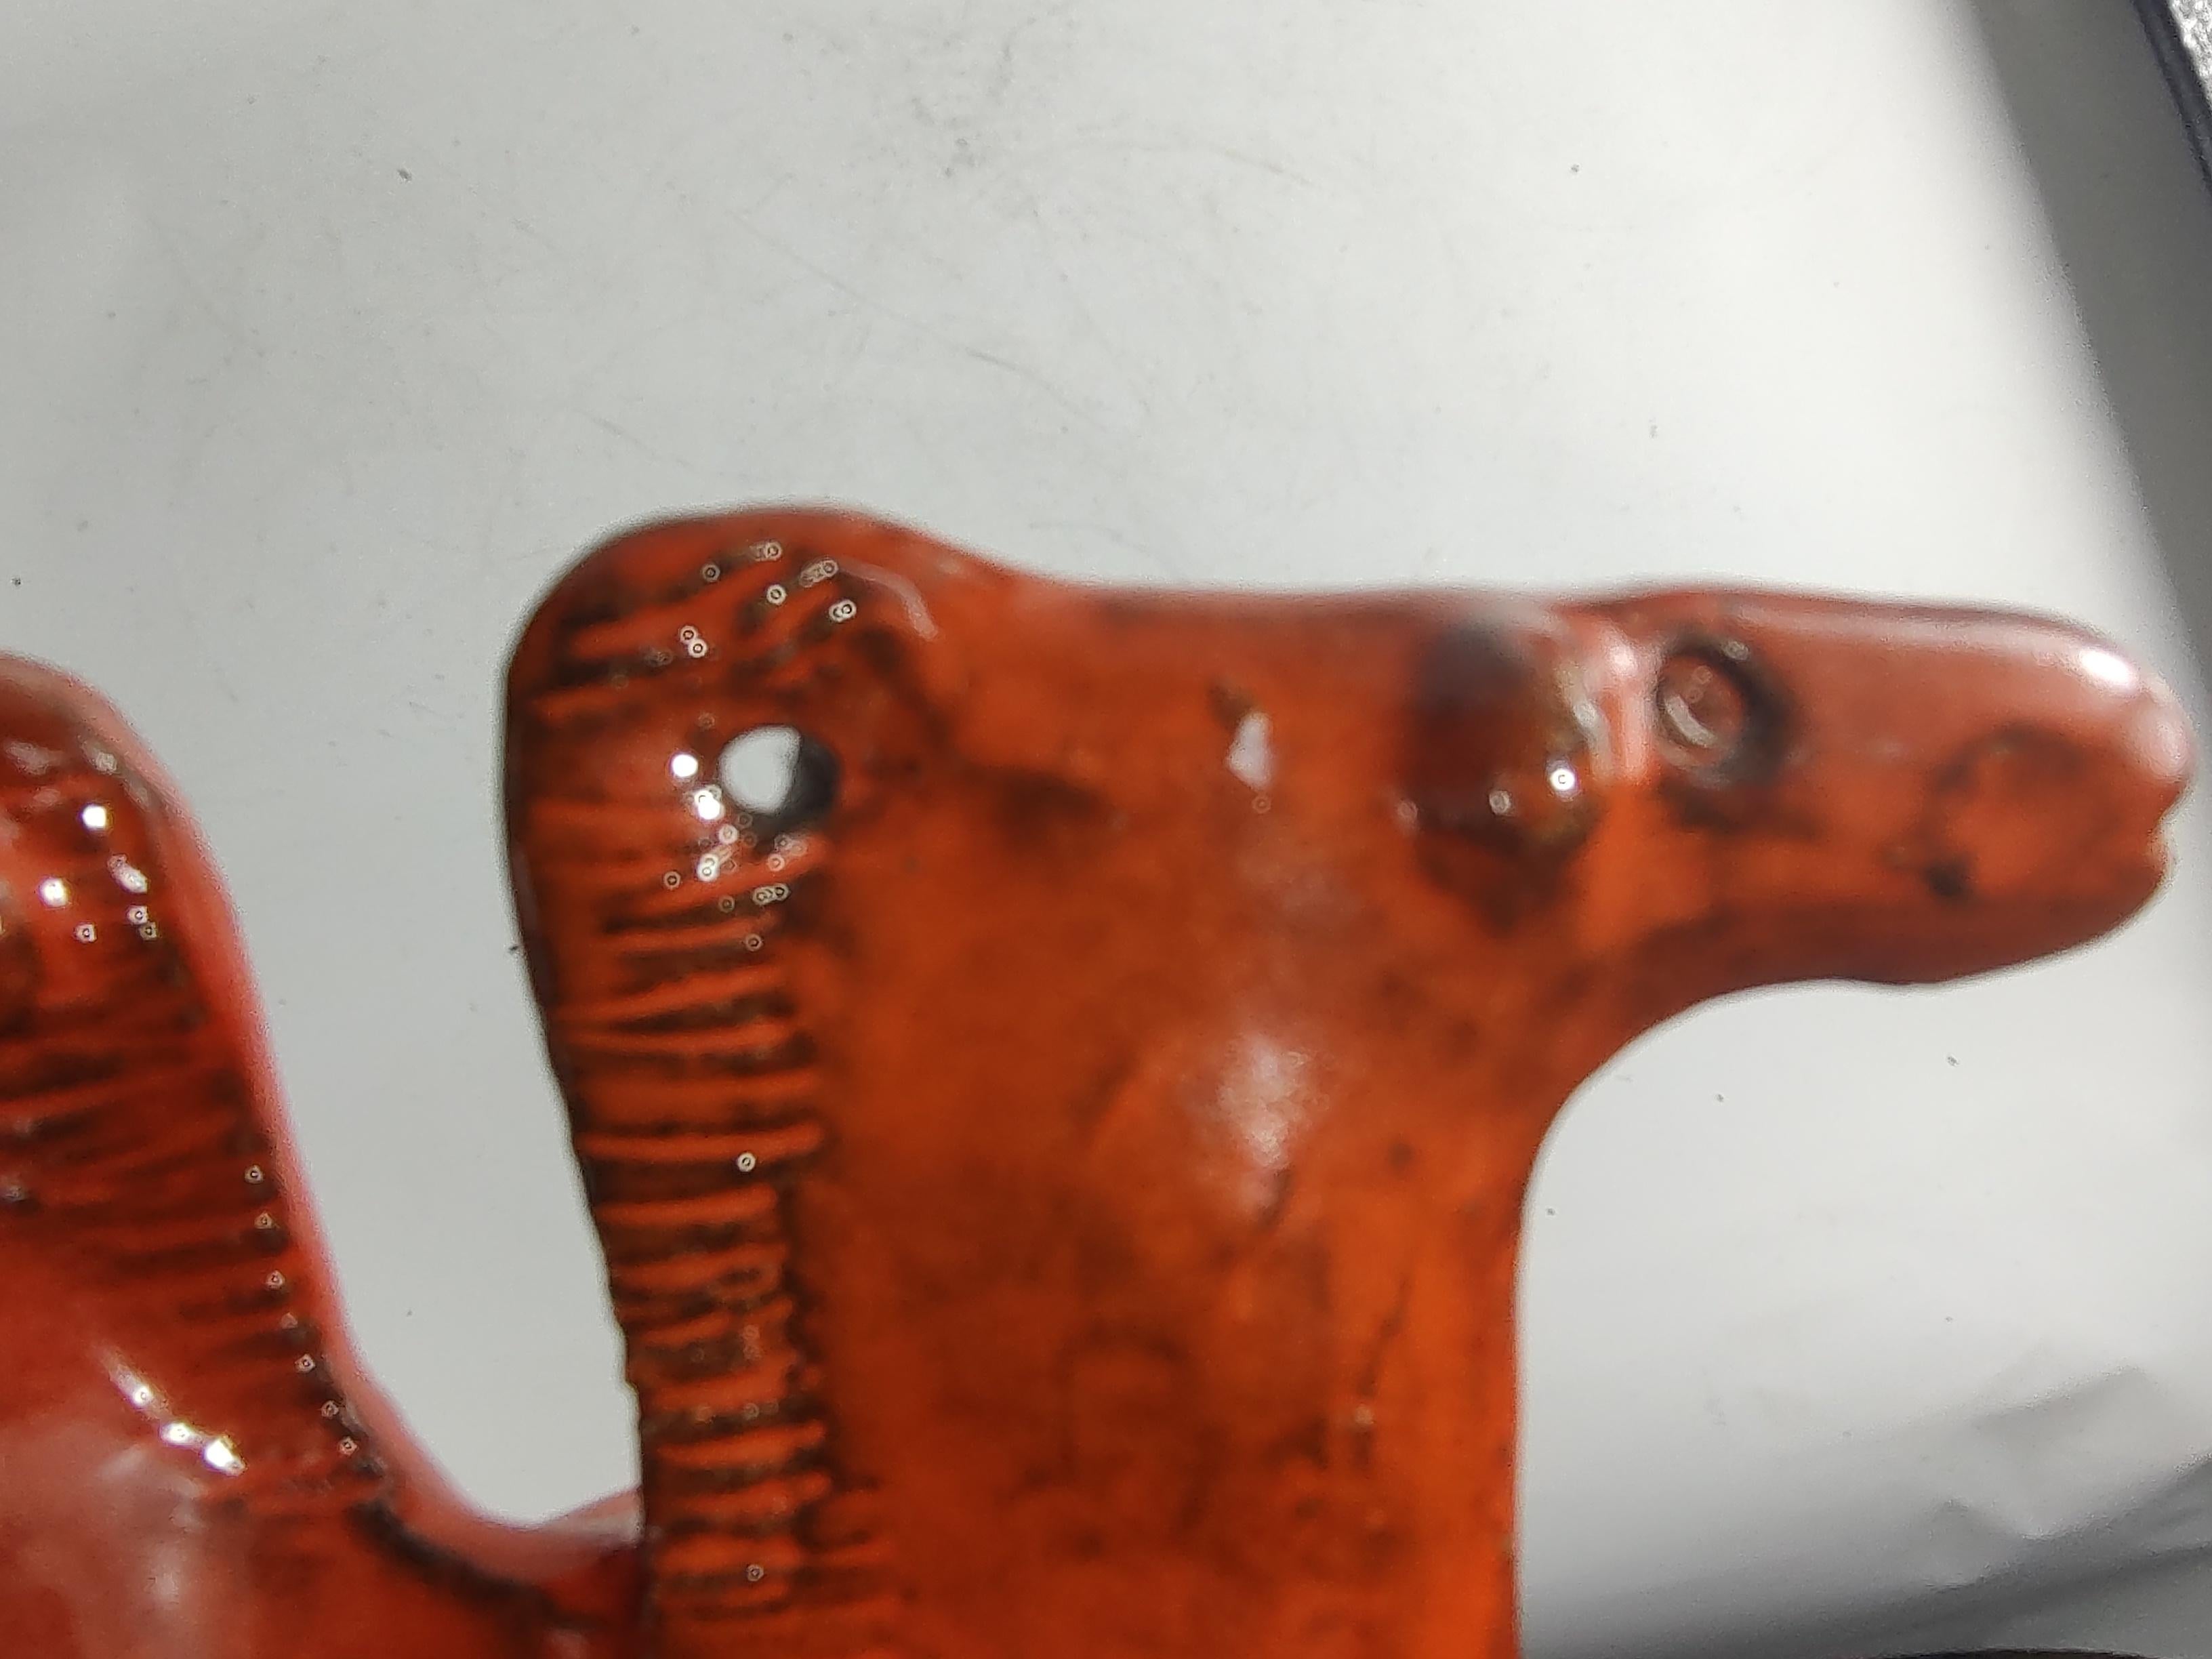 Fabulous Sculptural stoneware abstract object with a two headed camel atop round pillar with impressions in a mid sixties orange. In excellent condition with no visible chips or cracks. Aldo Londi for Bitossi c1965